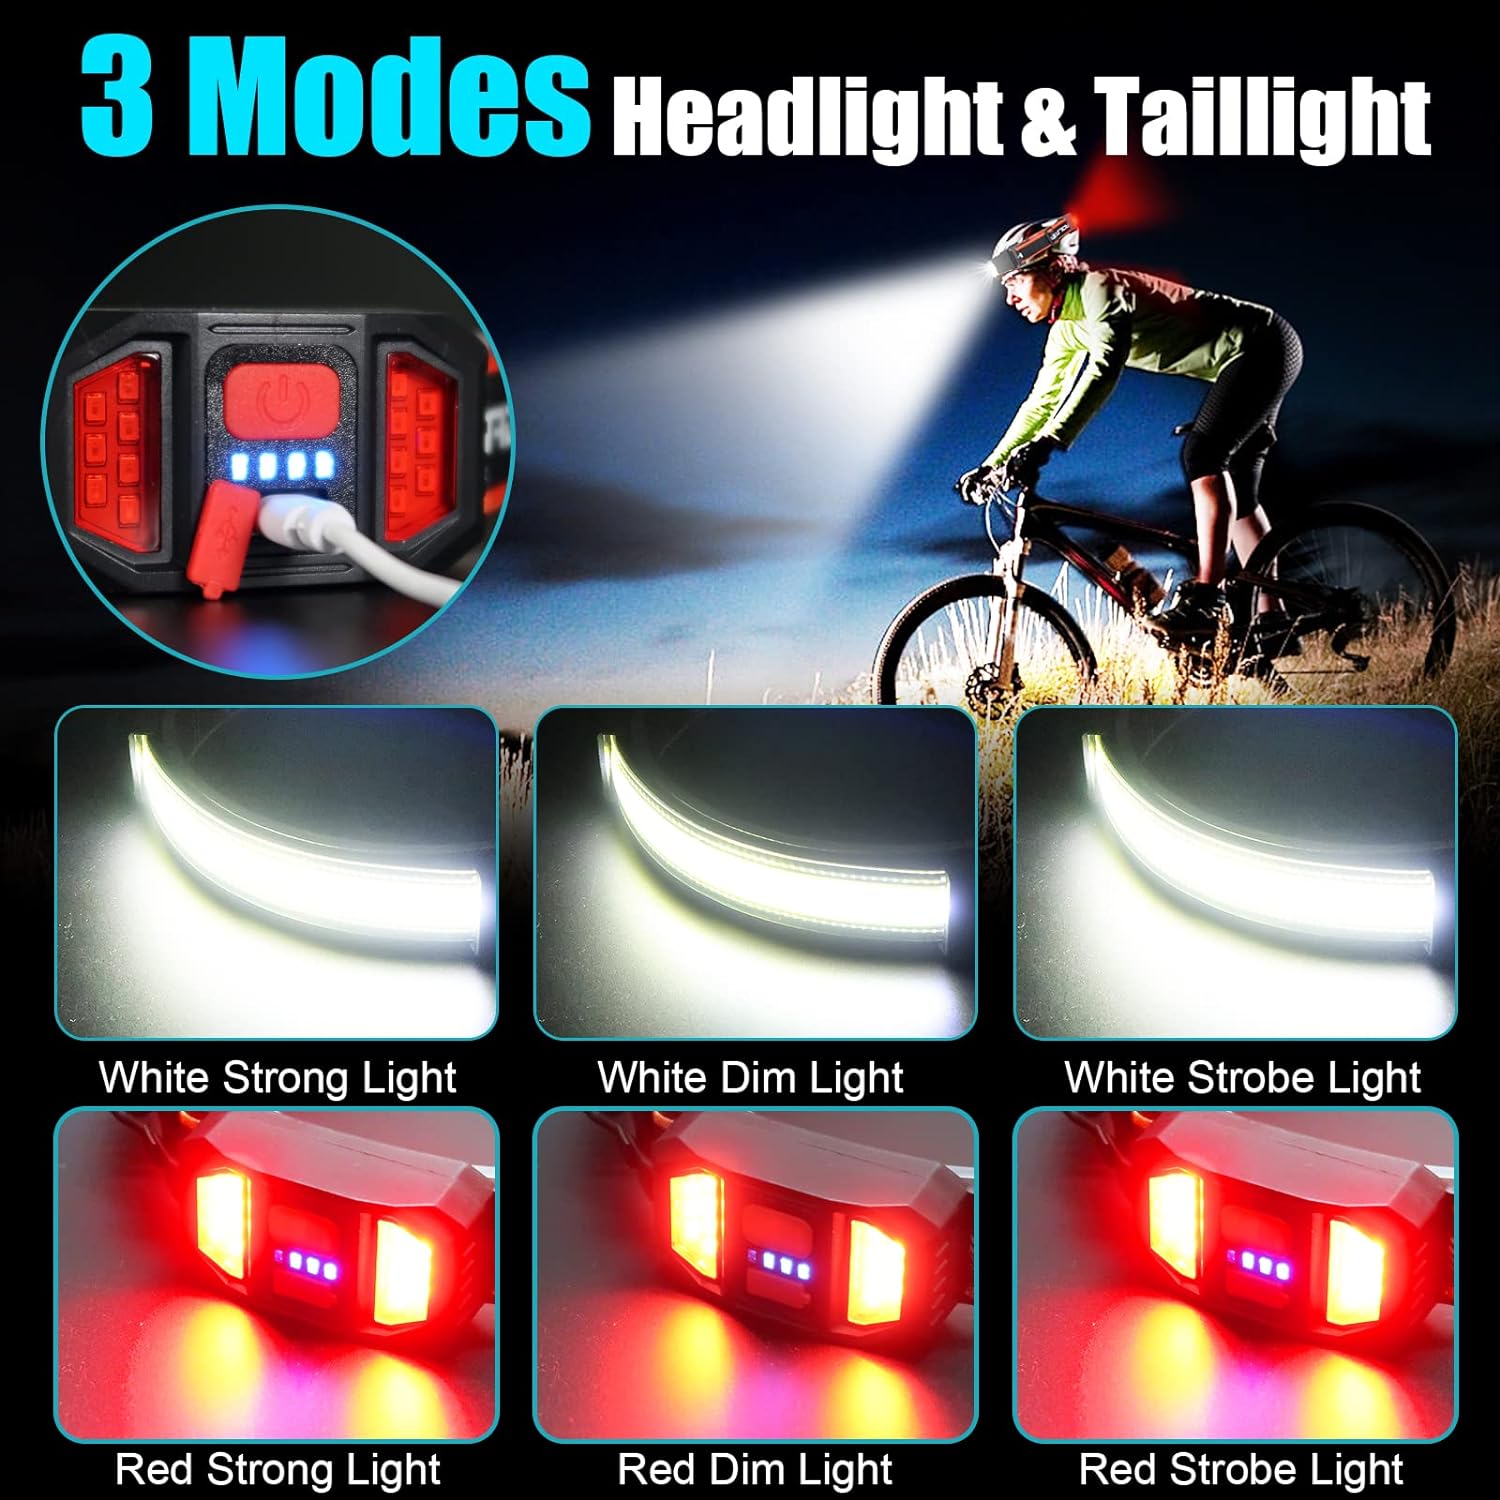 PSDRIQQ Headlamp Rechargeable, 3 Pack Bright LED Headlamps Wide Beam Head Lamp Headlight Flashlight with Red Tail Light 1200lm Lightweight Adjustable Waterproof for Biking Running Fishing Camping